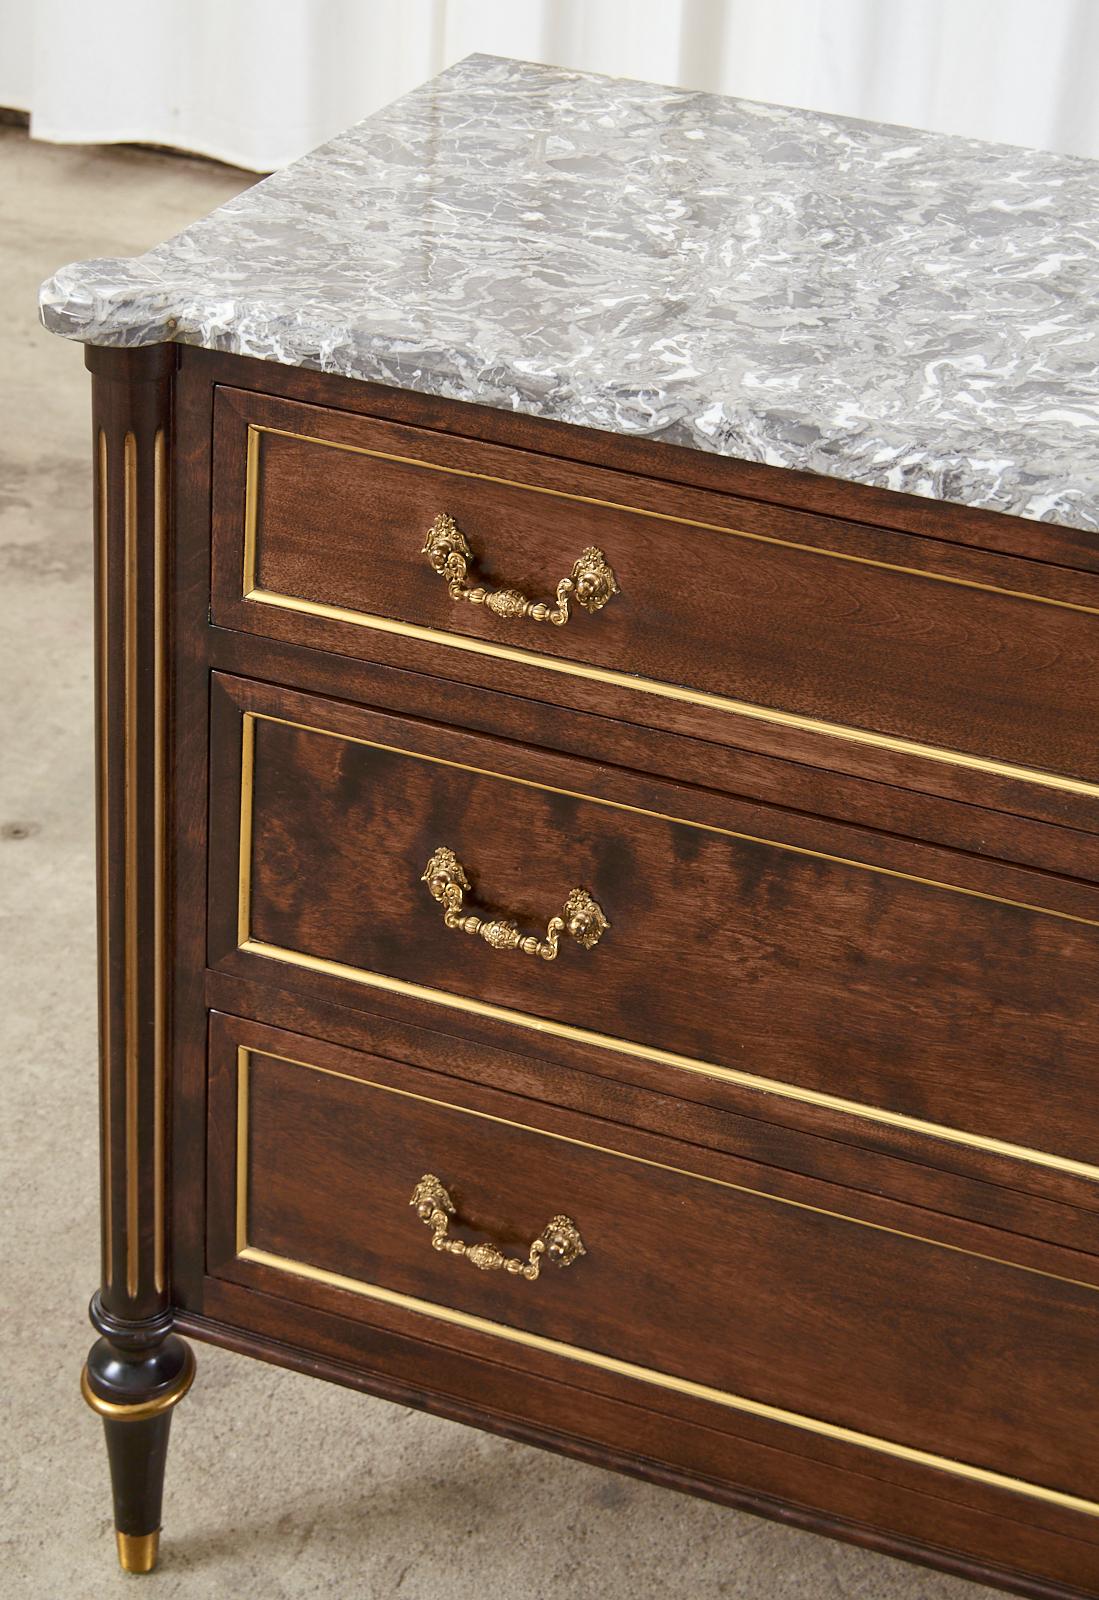 20th Century Pair of Louis XVI Style Marble Top Mahogany Commode Chests